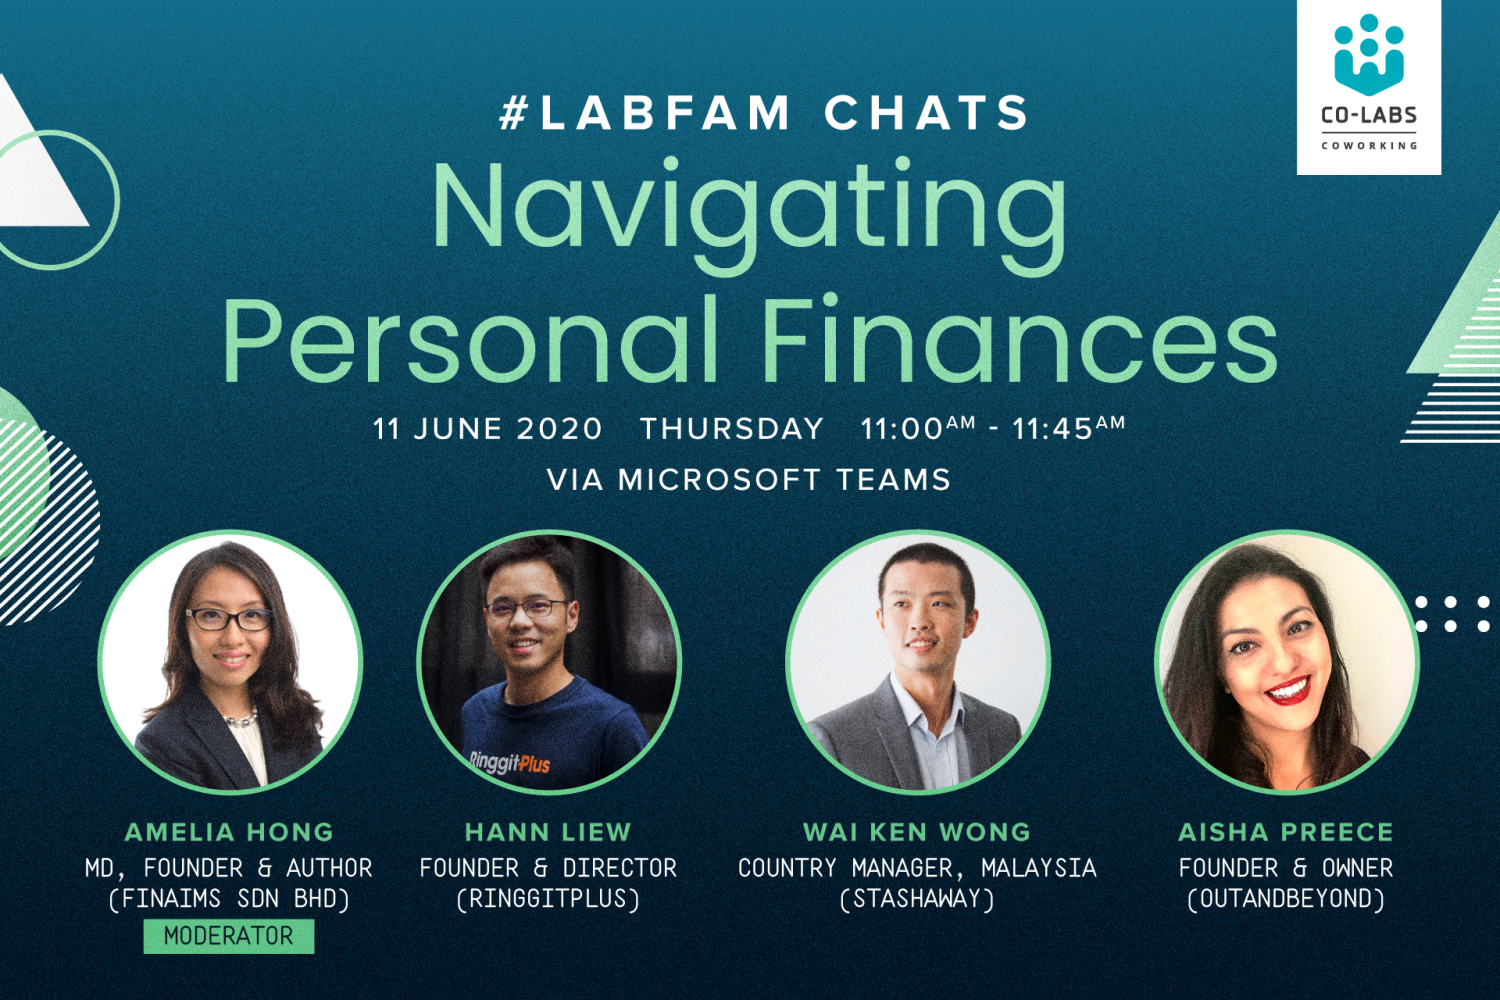 #LabFam Chats: Navigating Personal Finances Poster - Co-labs Coworking